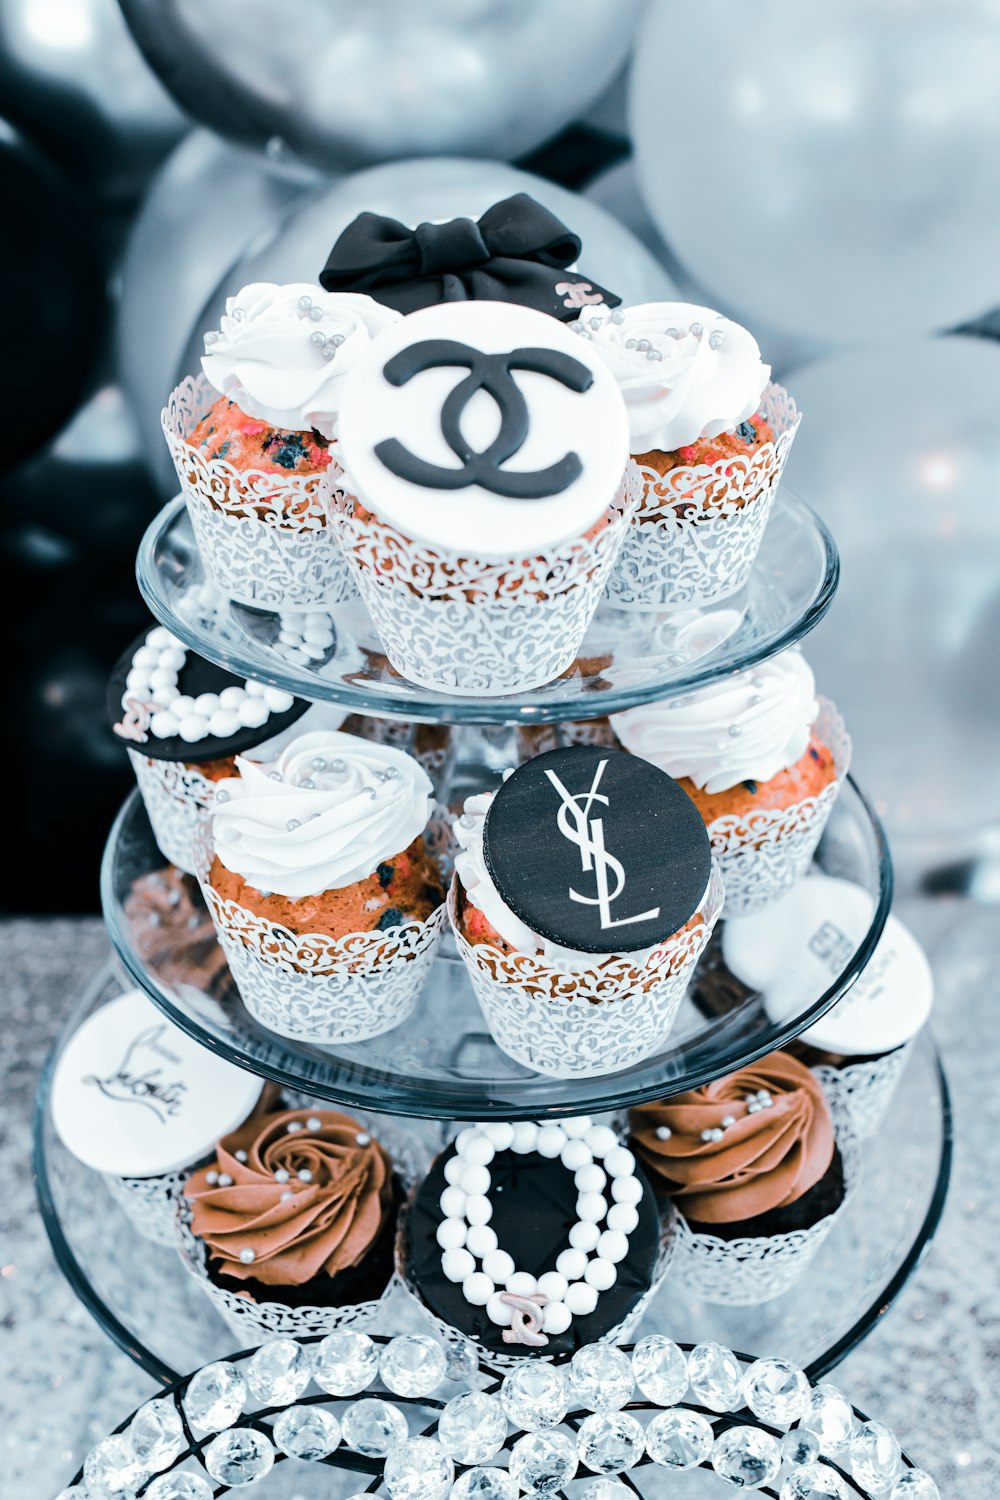 cupcakes on clear glass cake stand